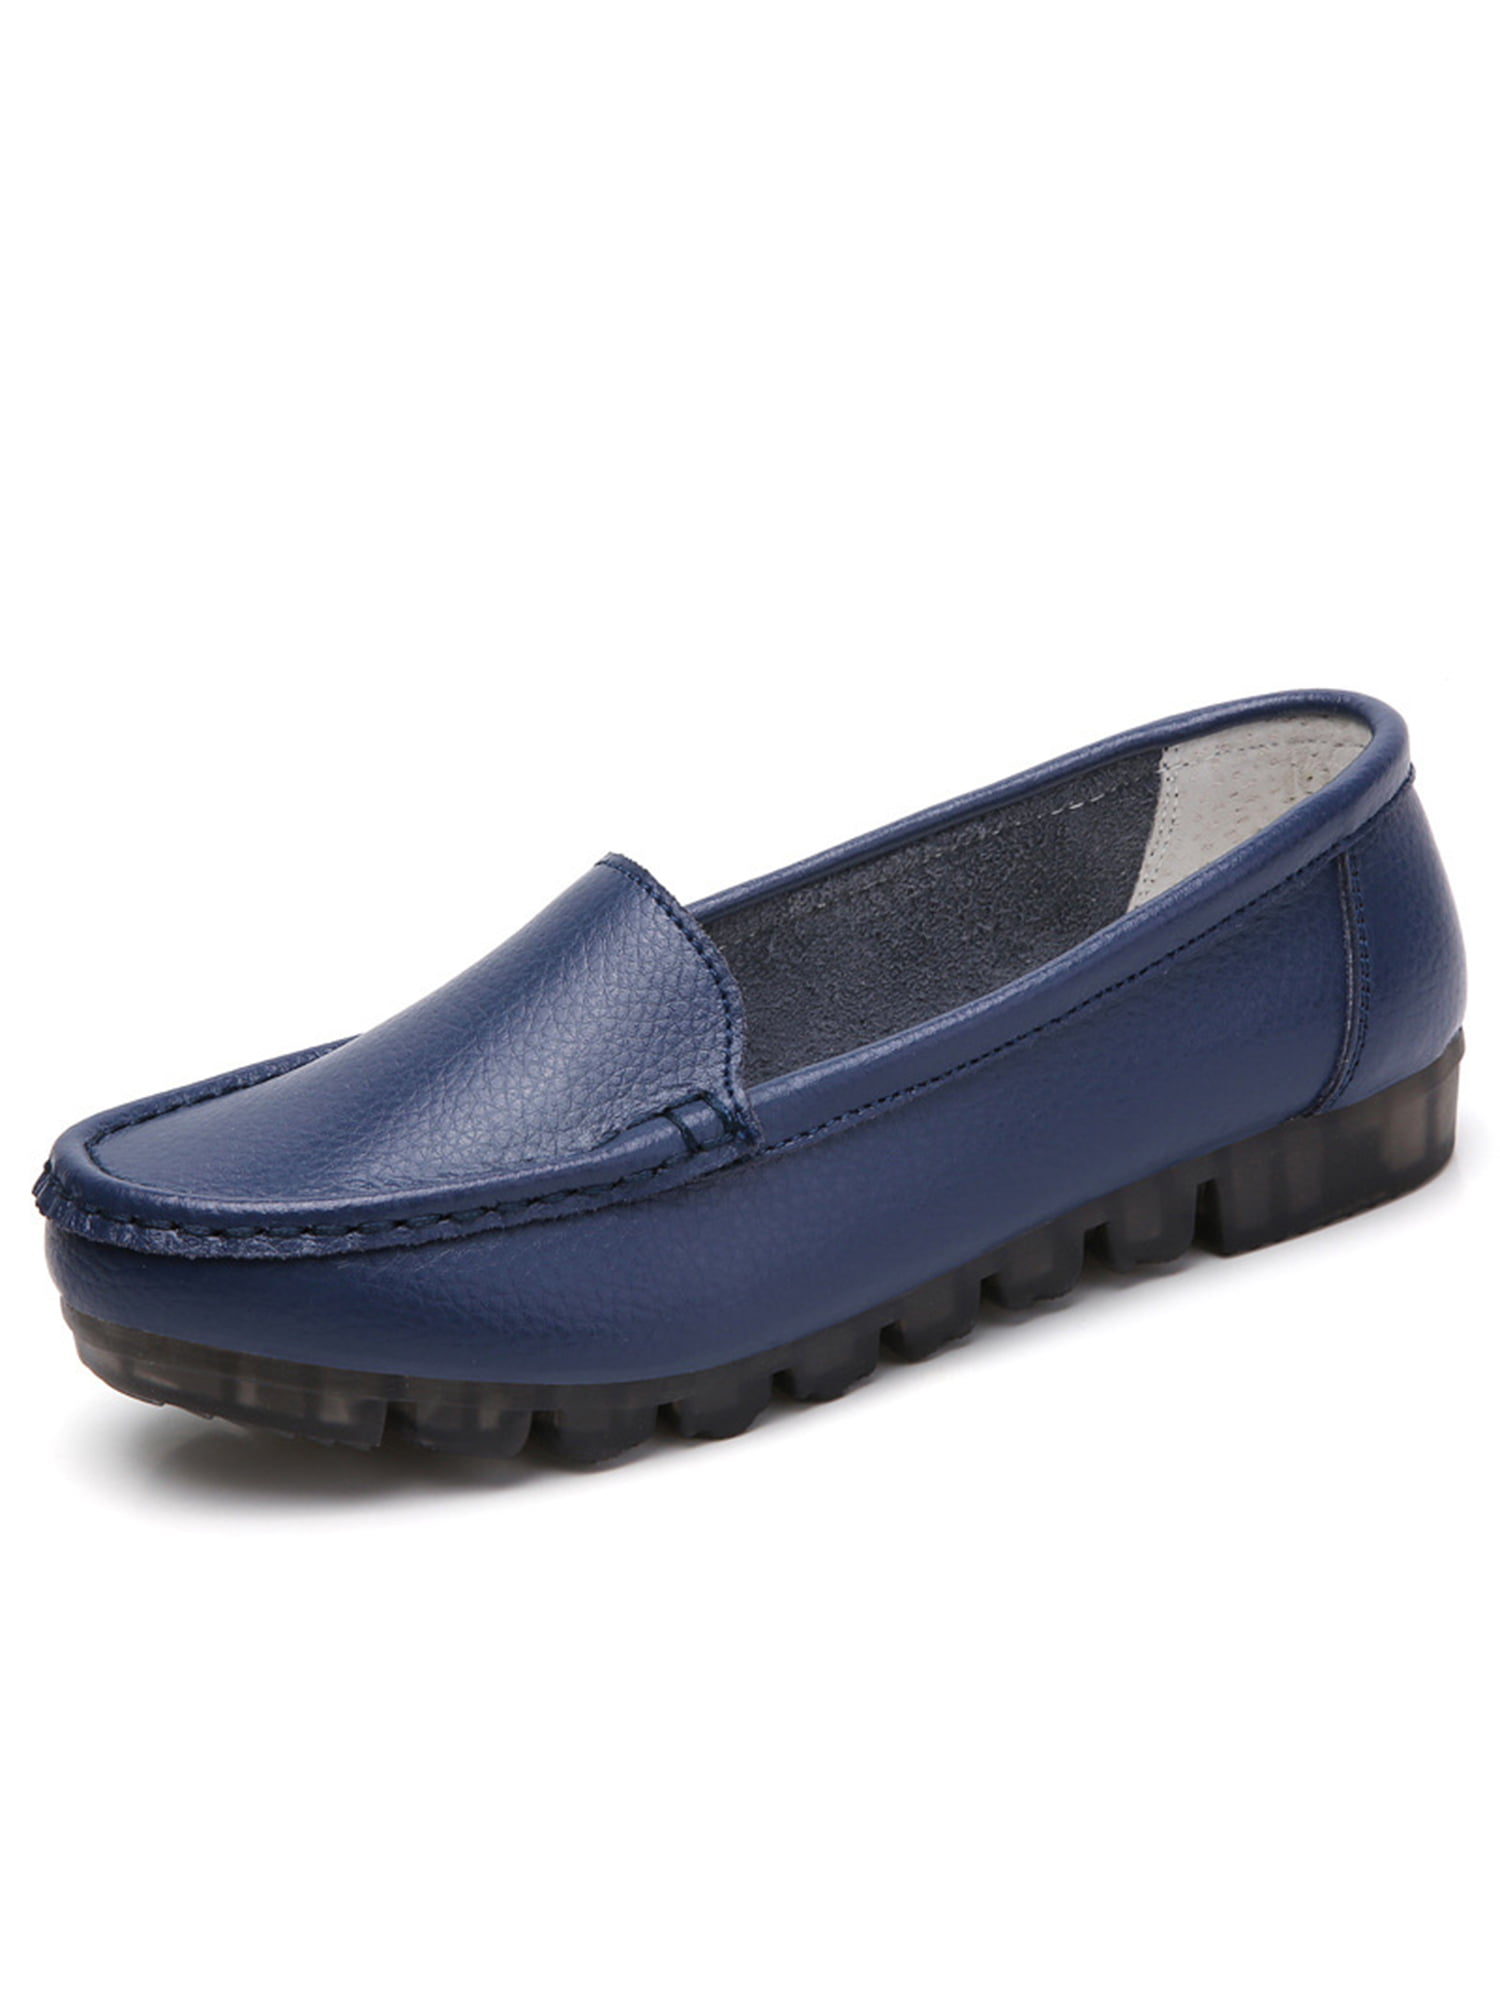 Geox Loafer in Dark Blue Womens Shoes Flats and flat shoes Loafers and moccasins Black 